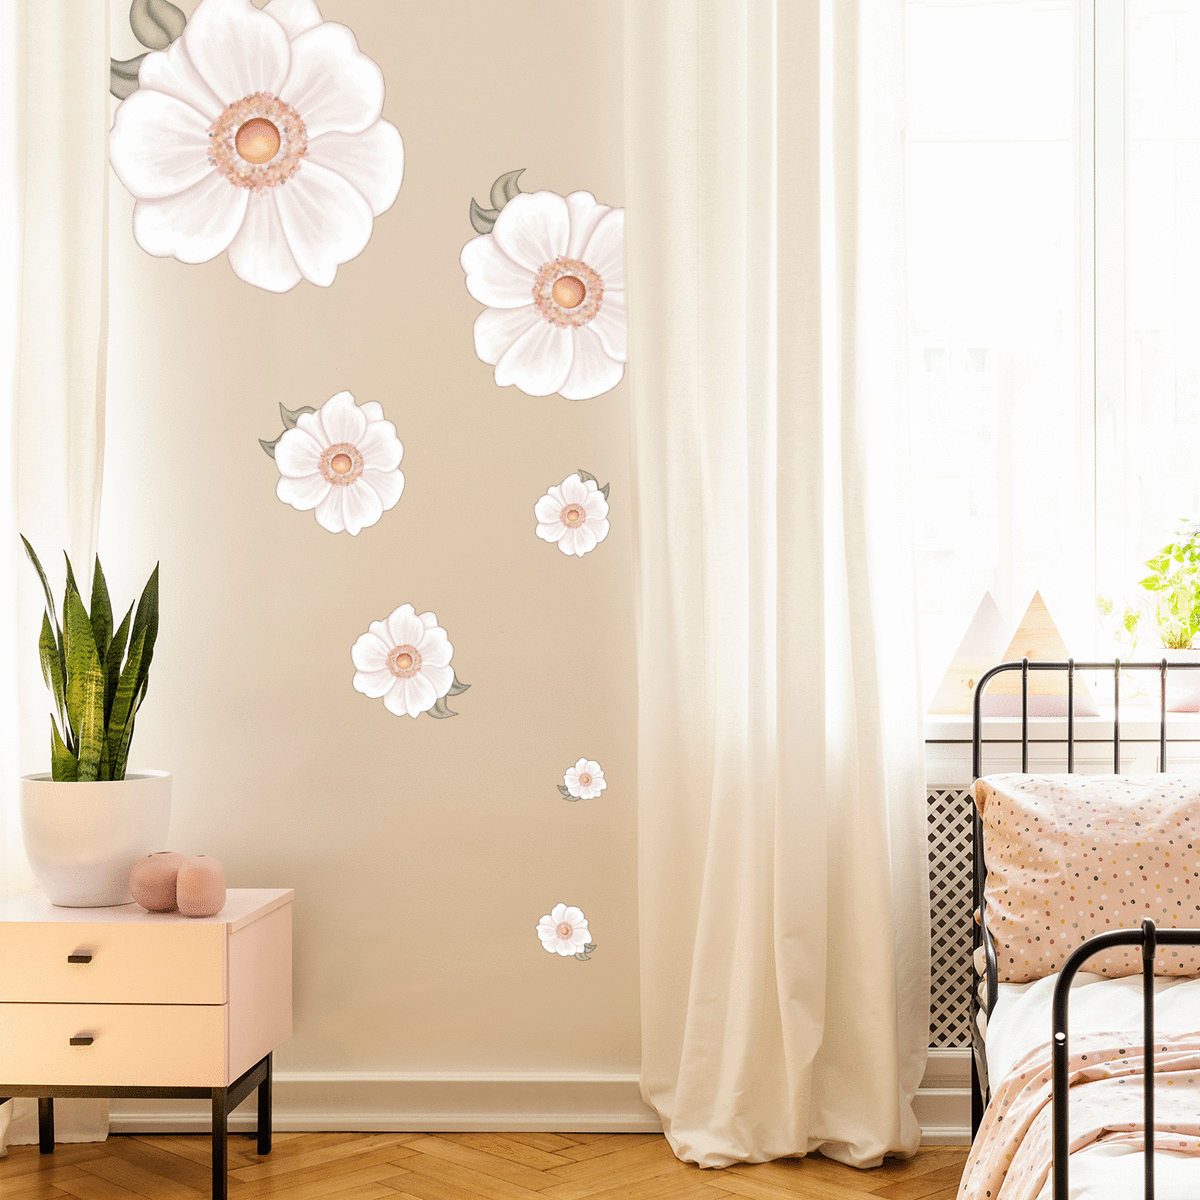 Lola Daisy | Removable PhotoTex Wall Decals | Blond + Noir